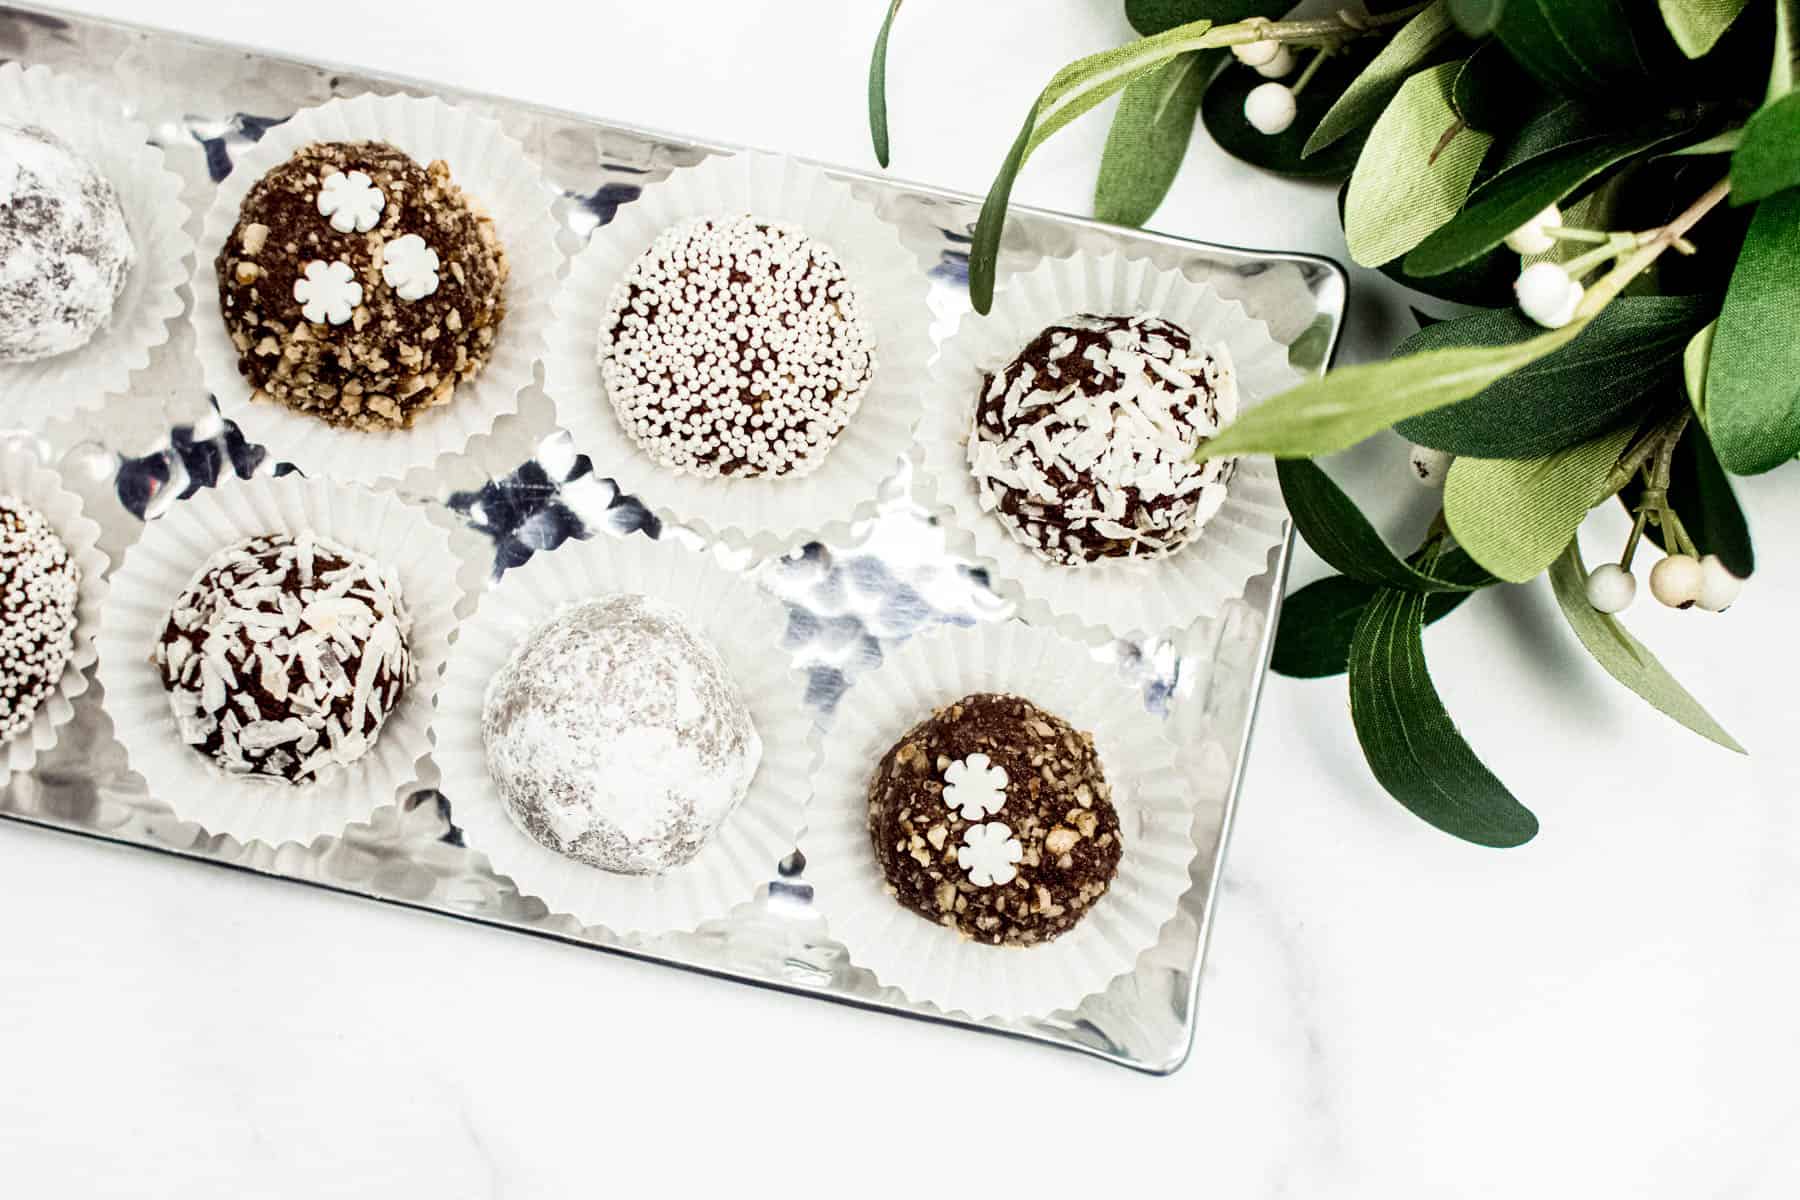 Spiced Rum Balls in a metal serving dish with winter greenery on a white marble surface.